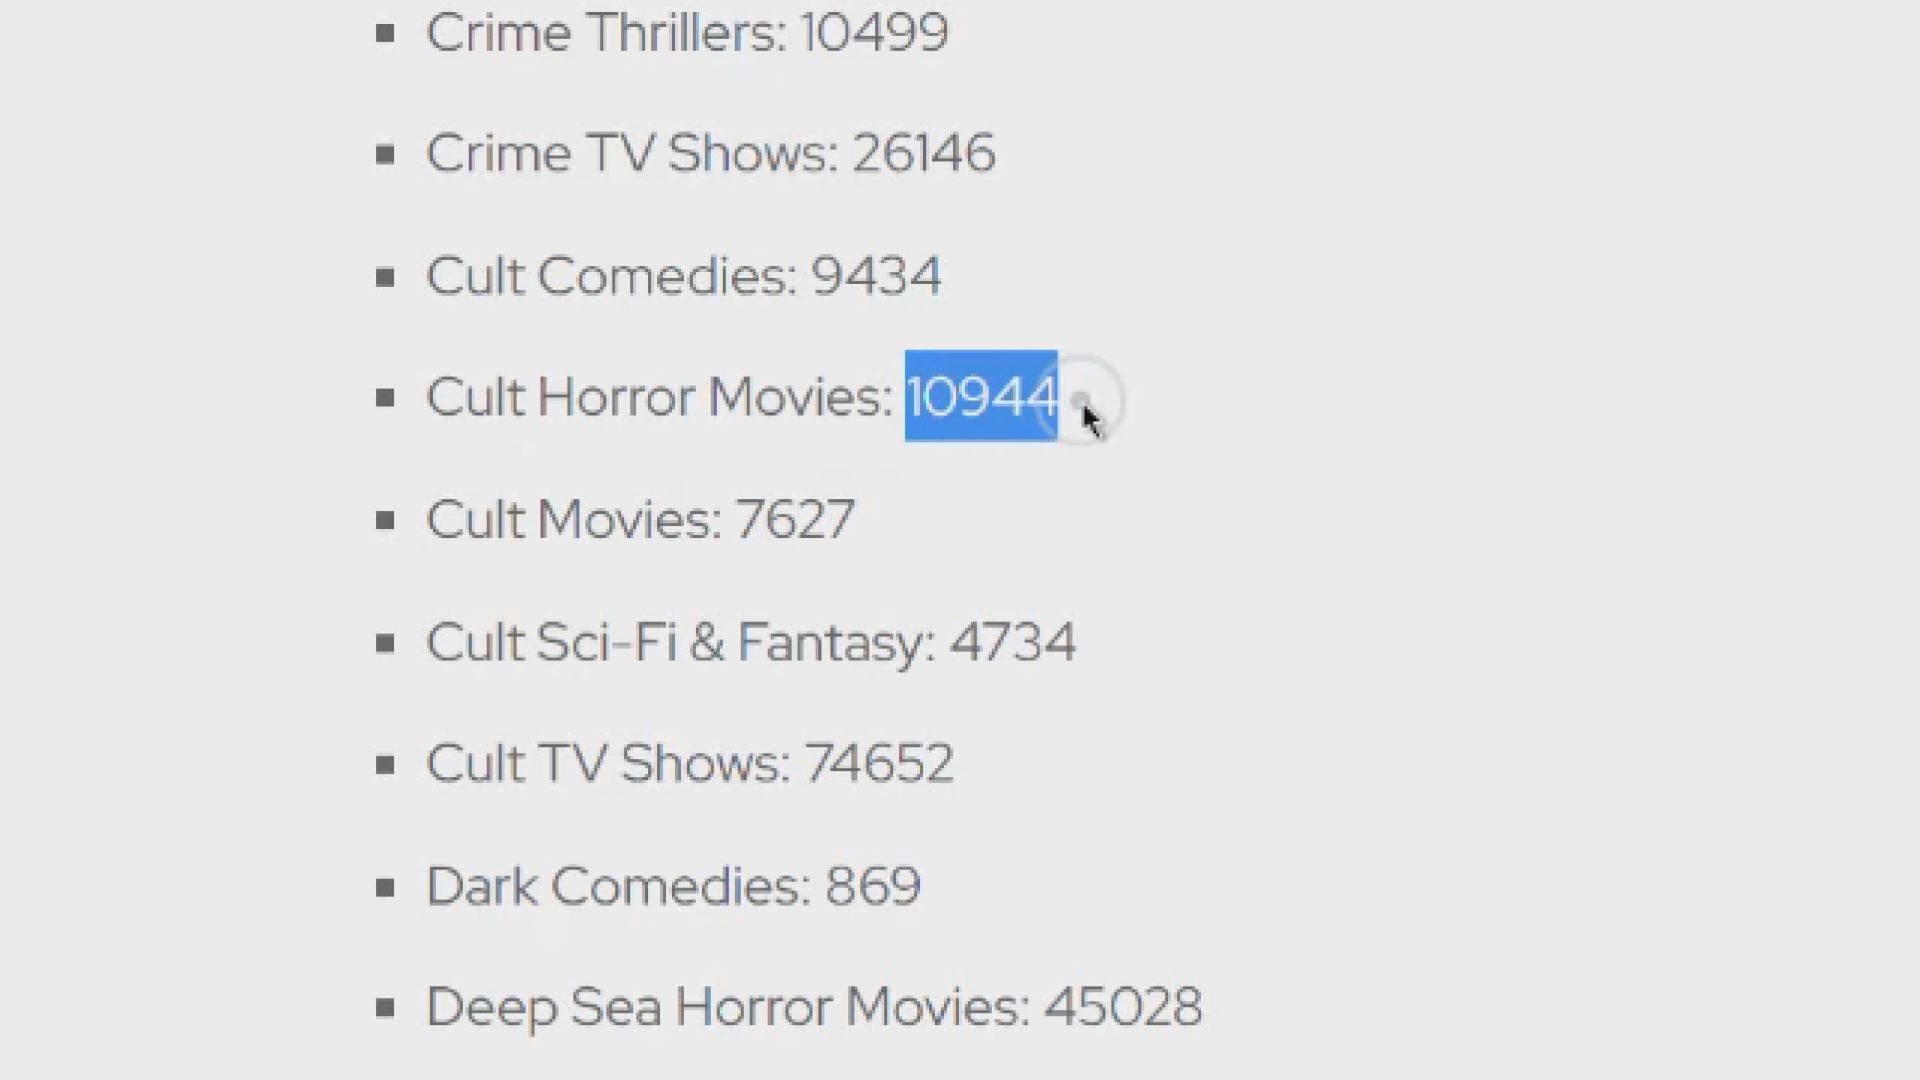 Use Netflix Codes to Find All the Horror Movies - What the Tech?